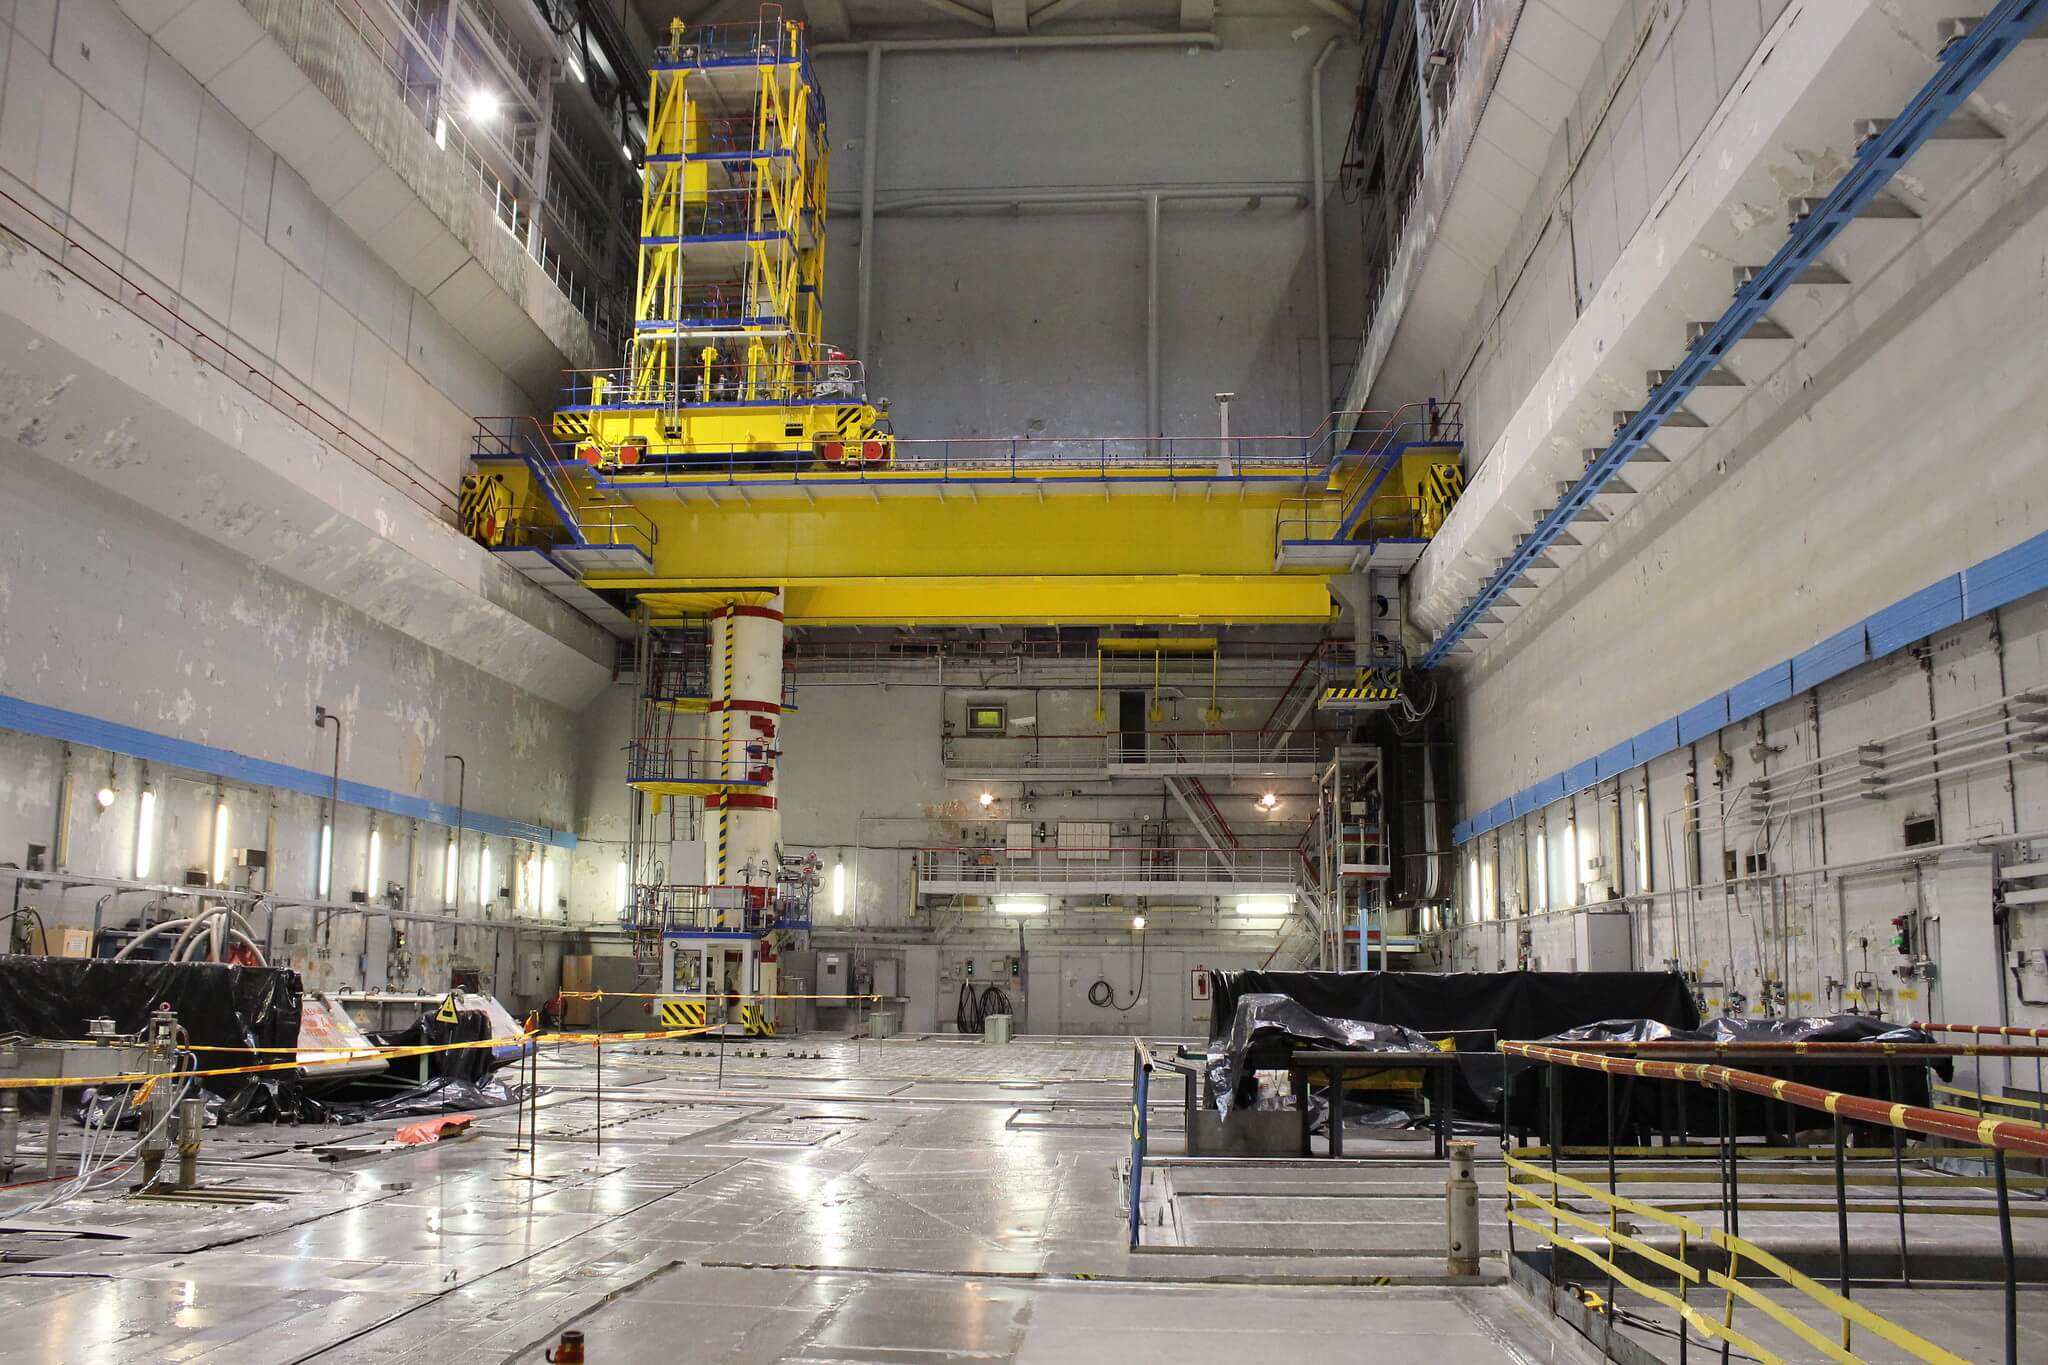 OndercoMcCauley-The reactor hall of unit 1 at Ignalina nuclear power plant in Lithuania in 2016. IAEA Imagebank